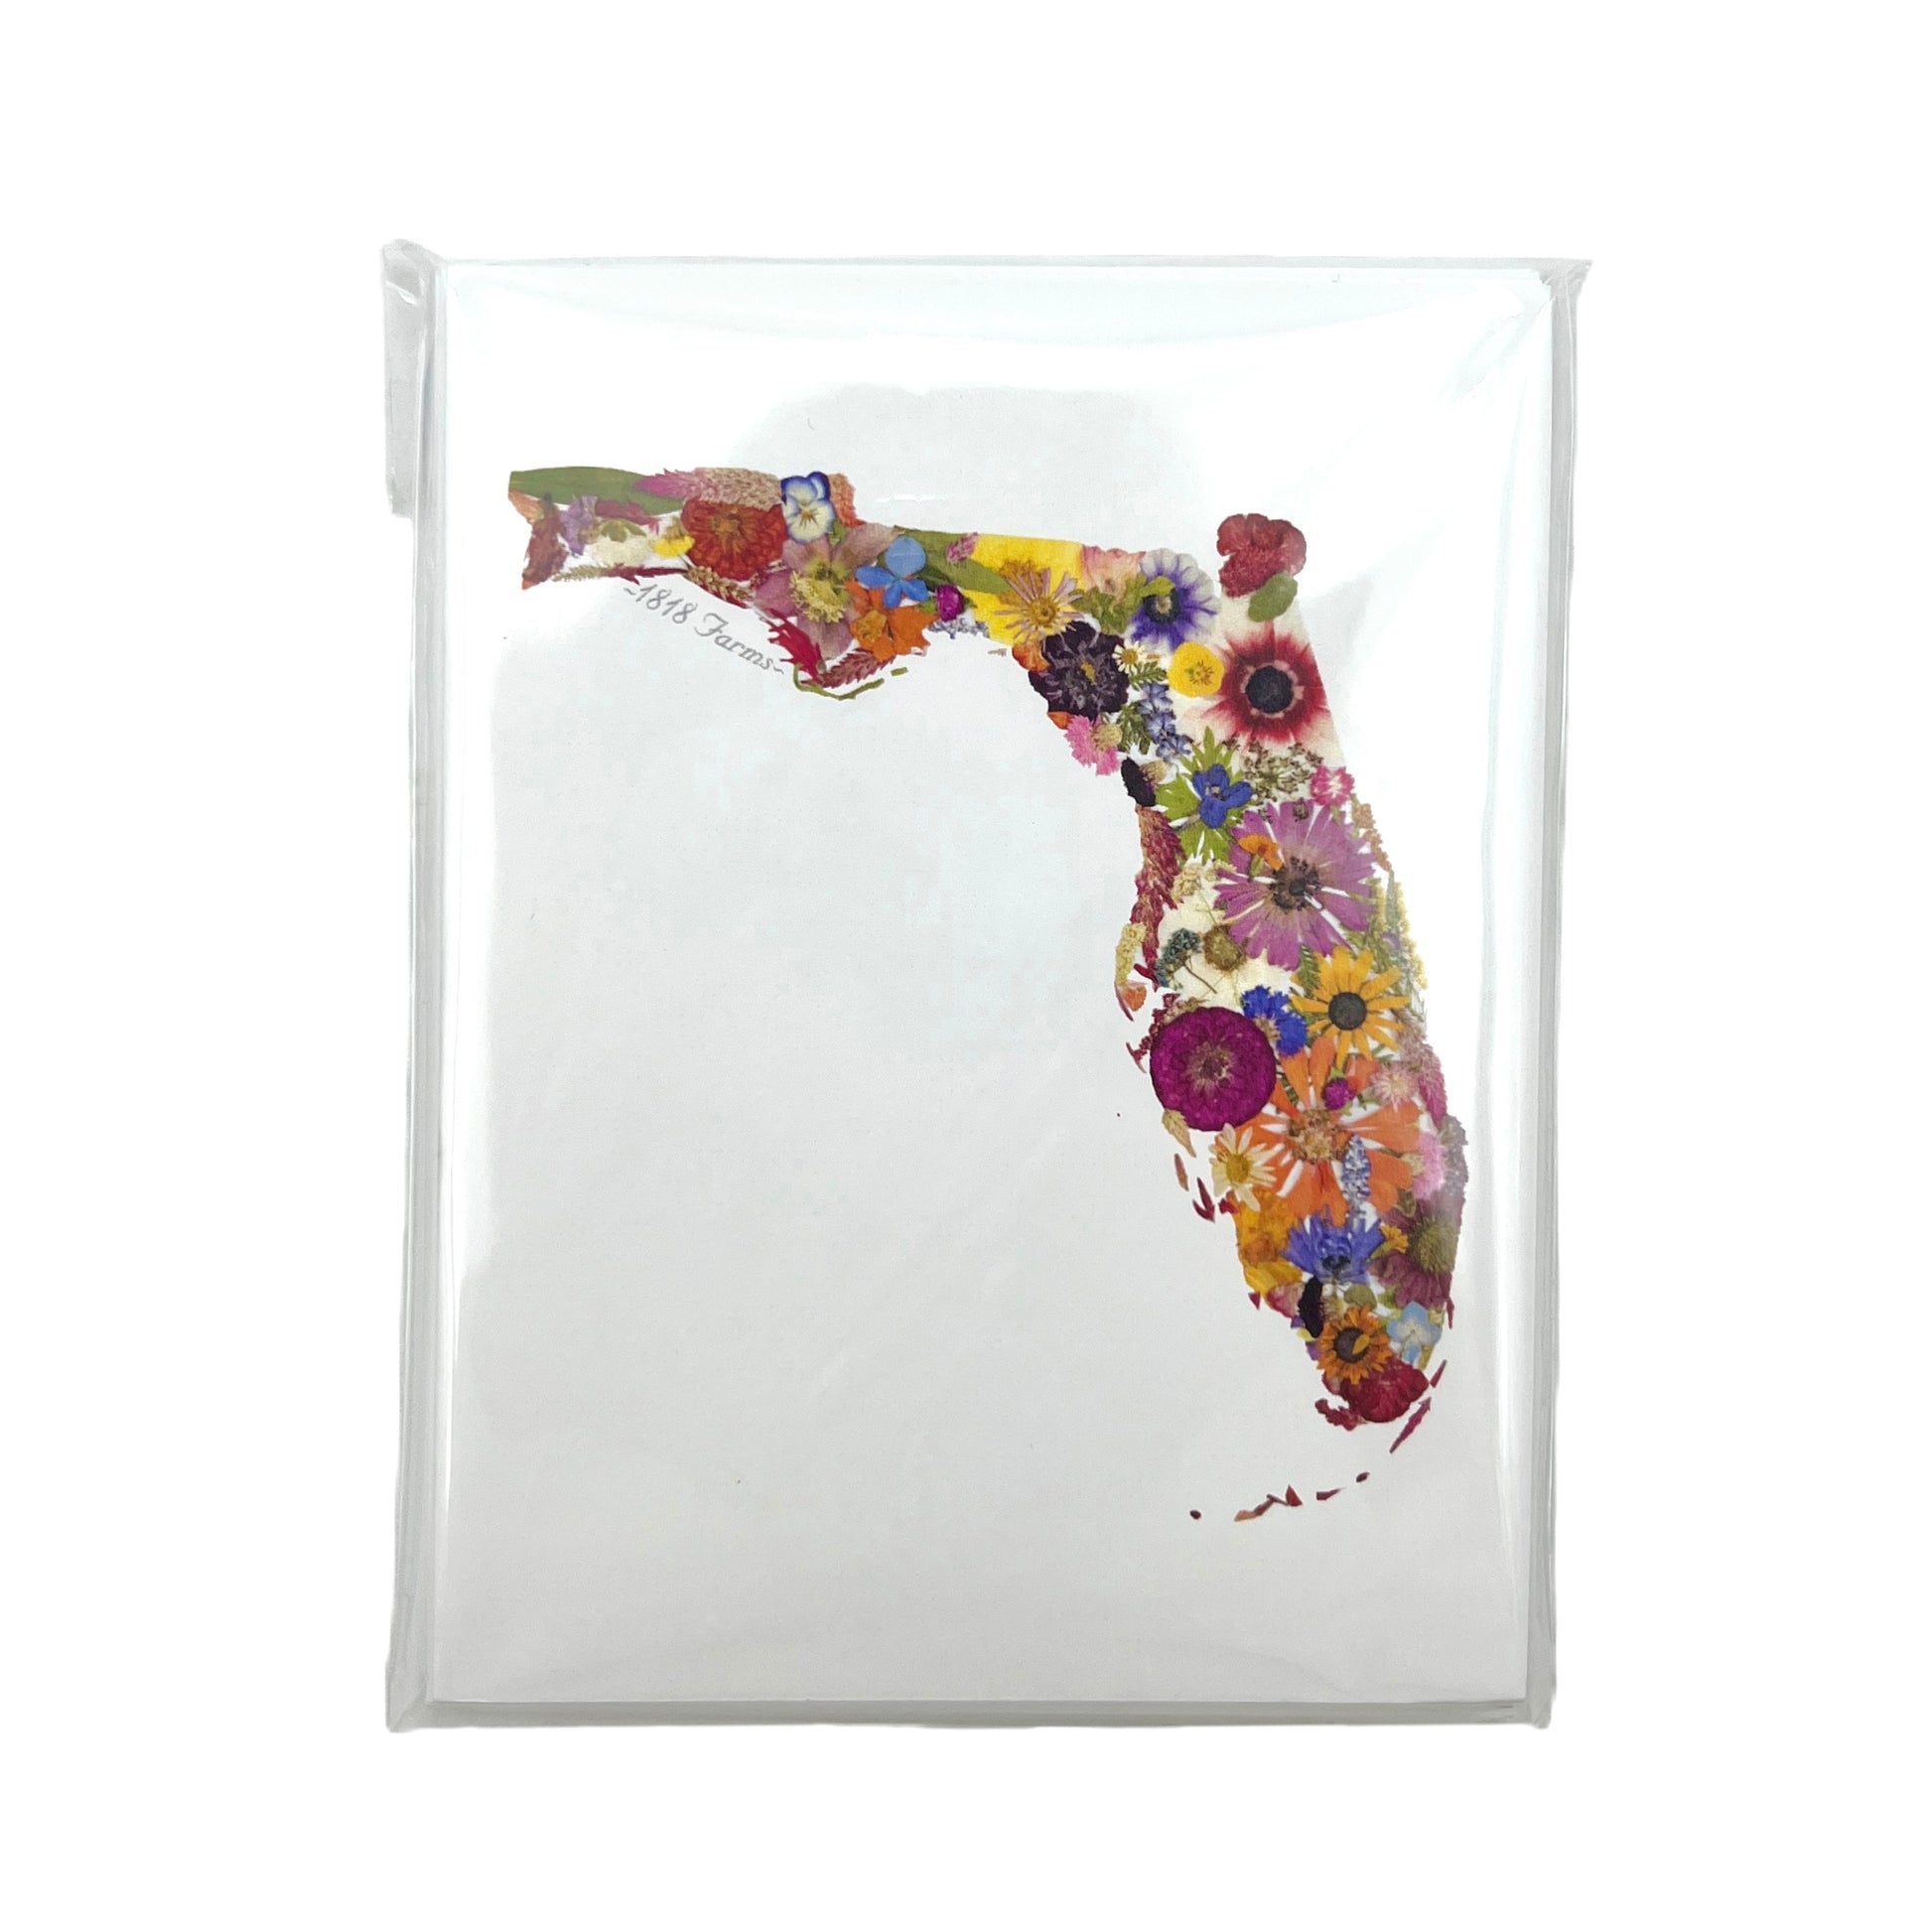 Florida Themed Notecards (Set of 6) Featuring Dried, Pressed Flowers - "Where I Bloom" Collection Notecard 1818 Farms   